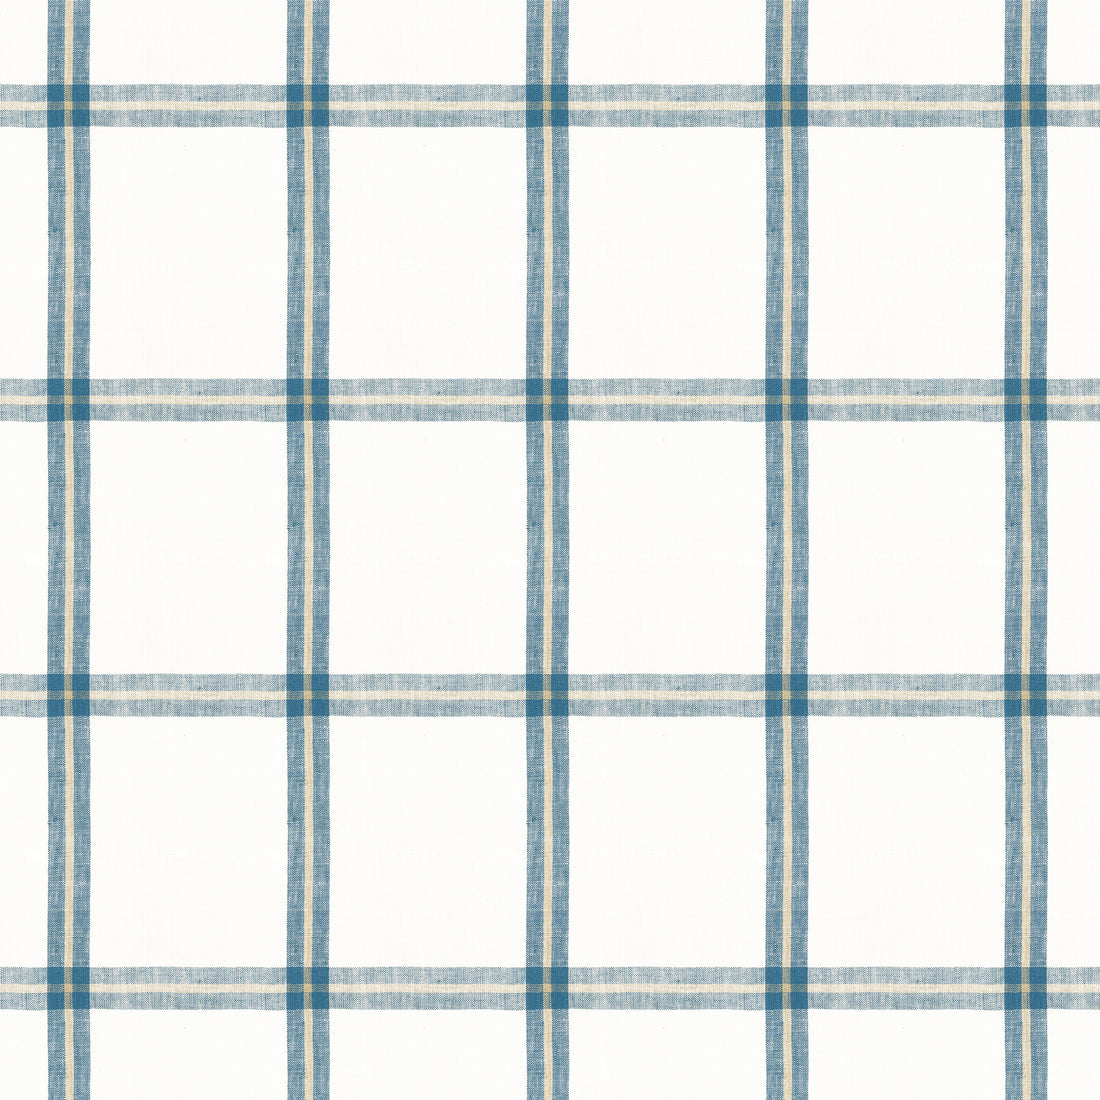 Huntington Plaid fabric in navy color - pattern number W781331 - by Thibaut in the Montecito collection